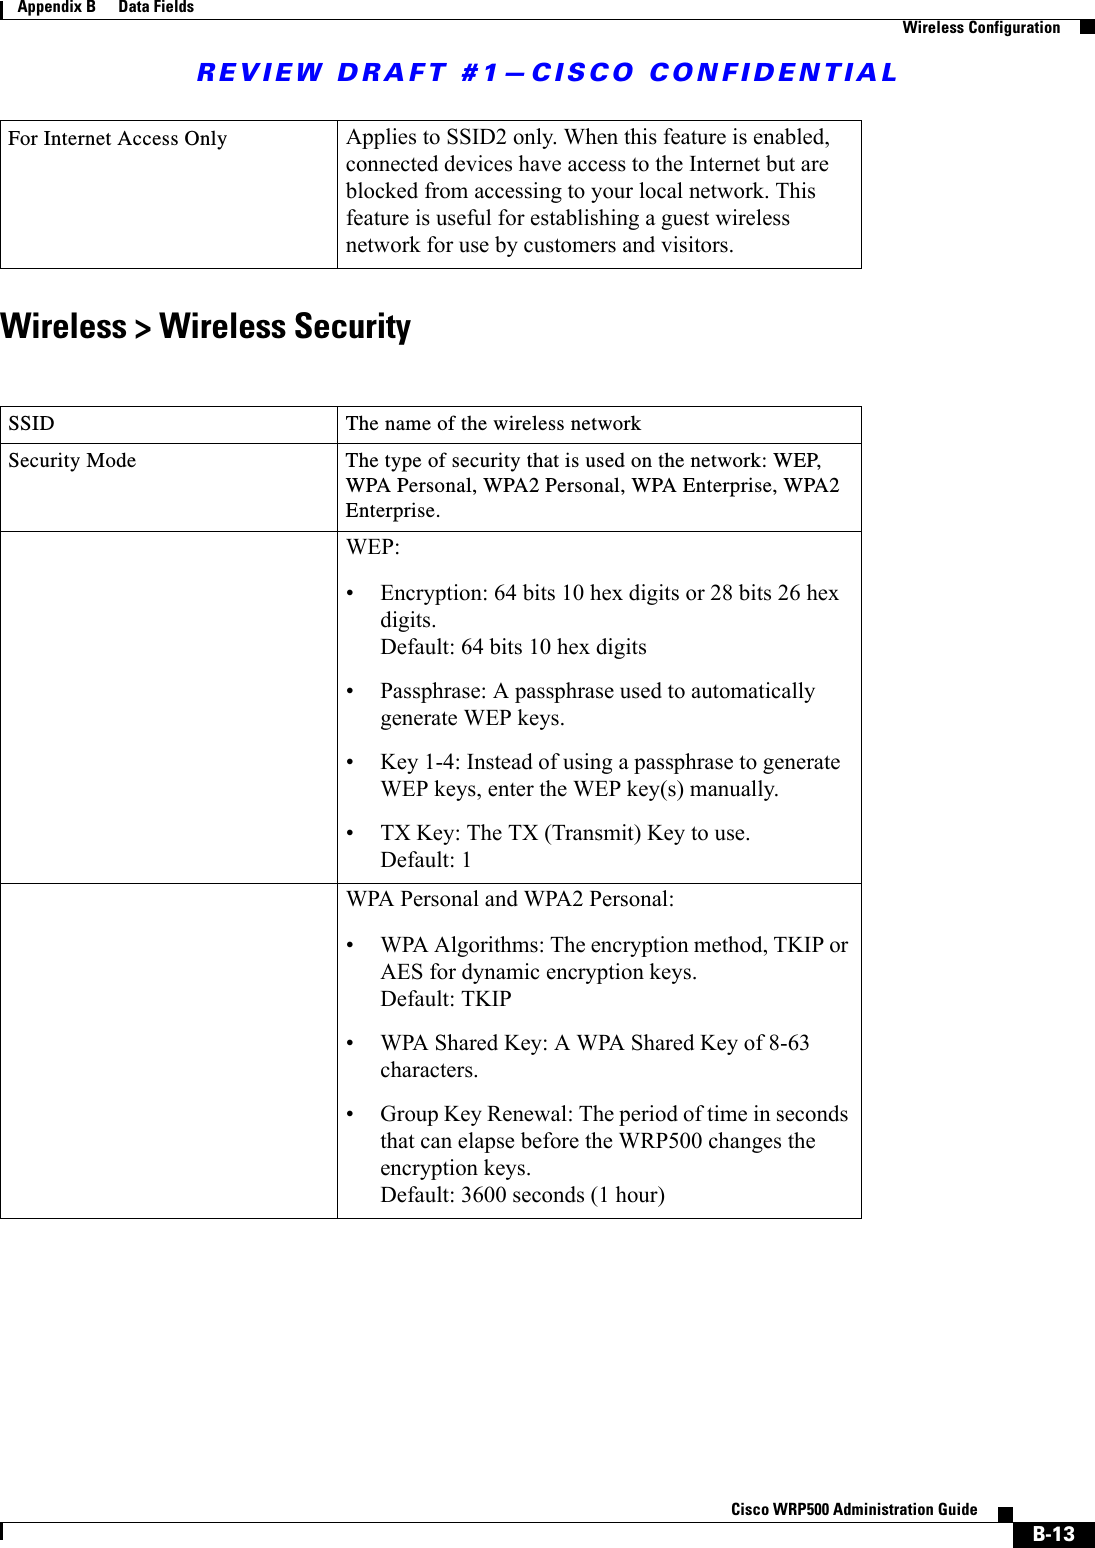 REVIEW DRAFT #1—CISCO CONFIDENTIALB-13Cisco WRP500 Administration Guide Appendix B      Data Fields  Wireless ConfigurationWireless &gt; Wireless SecurityFor Internet Access Only Applies to SSID2 only. When this feature is enabled, connected devices have access to the Internet but are blocked from accessing to your local network. This feature is useful for establishing a guest wireless network for use by customers and visitors. SSID The name of the wireless networkSecurity Mode The type of security that is used on the network: WEP, WPA Personal, WPA2 Personal, WPA Enterprise, WPA2 Enterprise.WEP:• Encryption: 64 bits 10 hex digits or 28 bits 26 hex digits. Default: 64 bits 10 hex digits• Passphrase: A passphrase used to automatically generate WEP keys.• Key 1-4: Instead of using a passphrase to generate WEP keys, enter the WEP key(s) manually.• TX Key: The TX (Transmit) Key to use.Default: 1WPA Personal and WPA2 Personal:• WPA Algorithms: The encryption method, TKIP or AES for dynamic encryption keys. Default: TKIP• WPA Shared Key: A WPA Shared Key of 8-63 characters. • Group Key Renewal: The period of time in seconds that can elapse before the WRP500 changes the encryption keys.Default: 3600 seconds (1 hour)